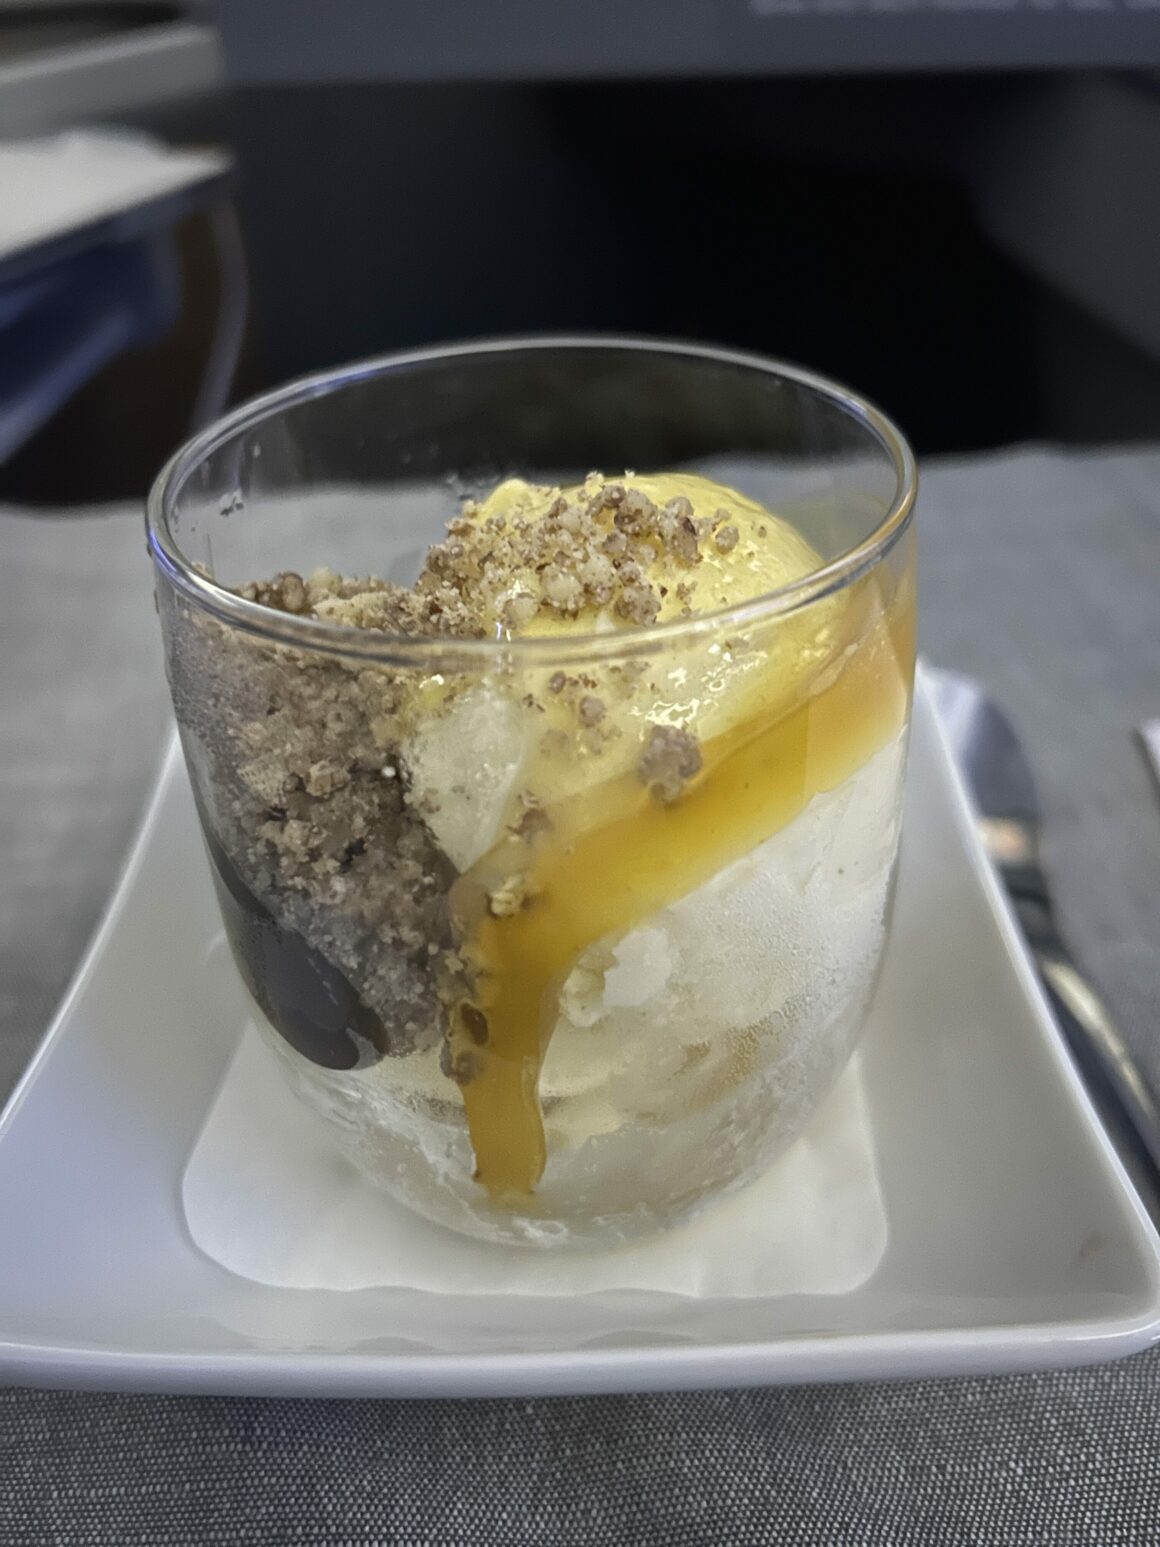 Ice Cream Sundae at American Airlines B777-300ER Business Class